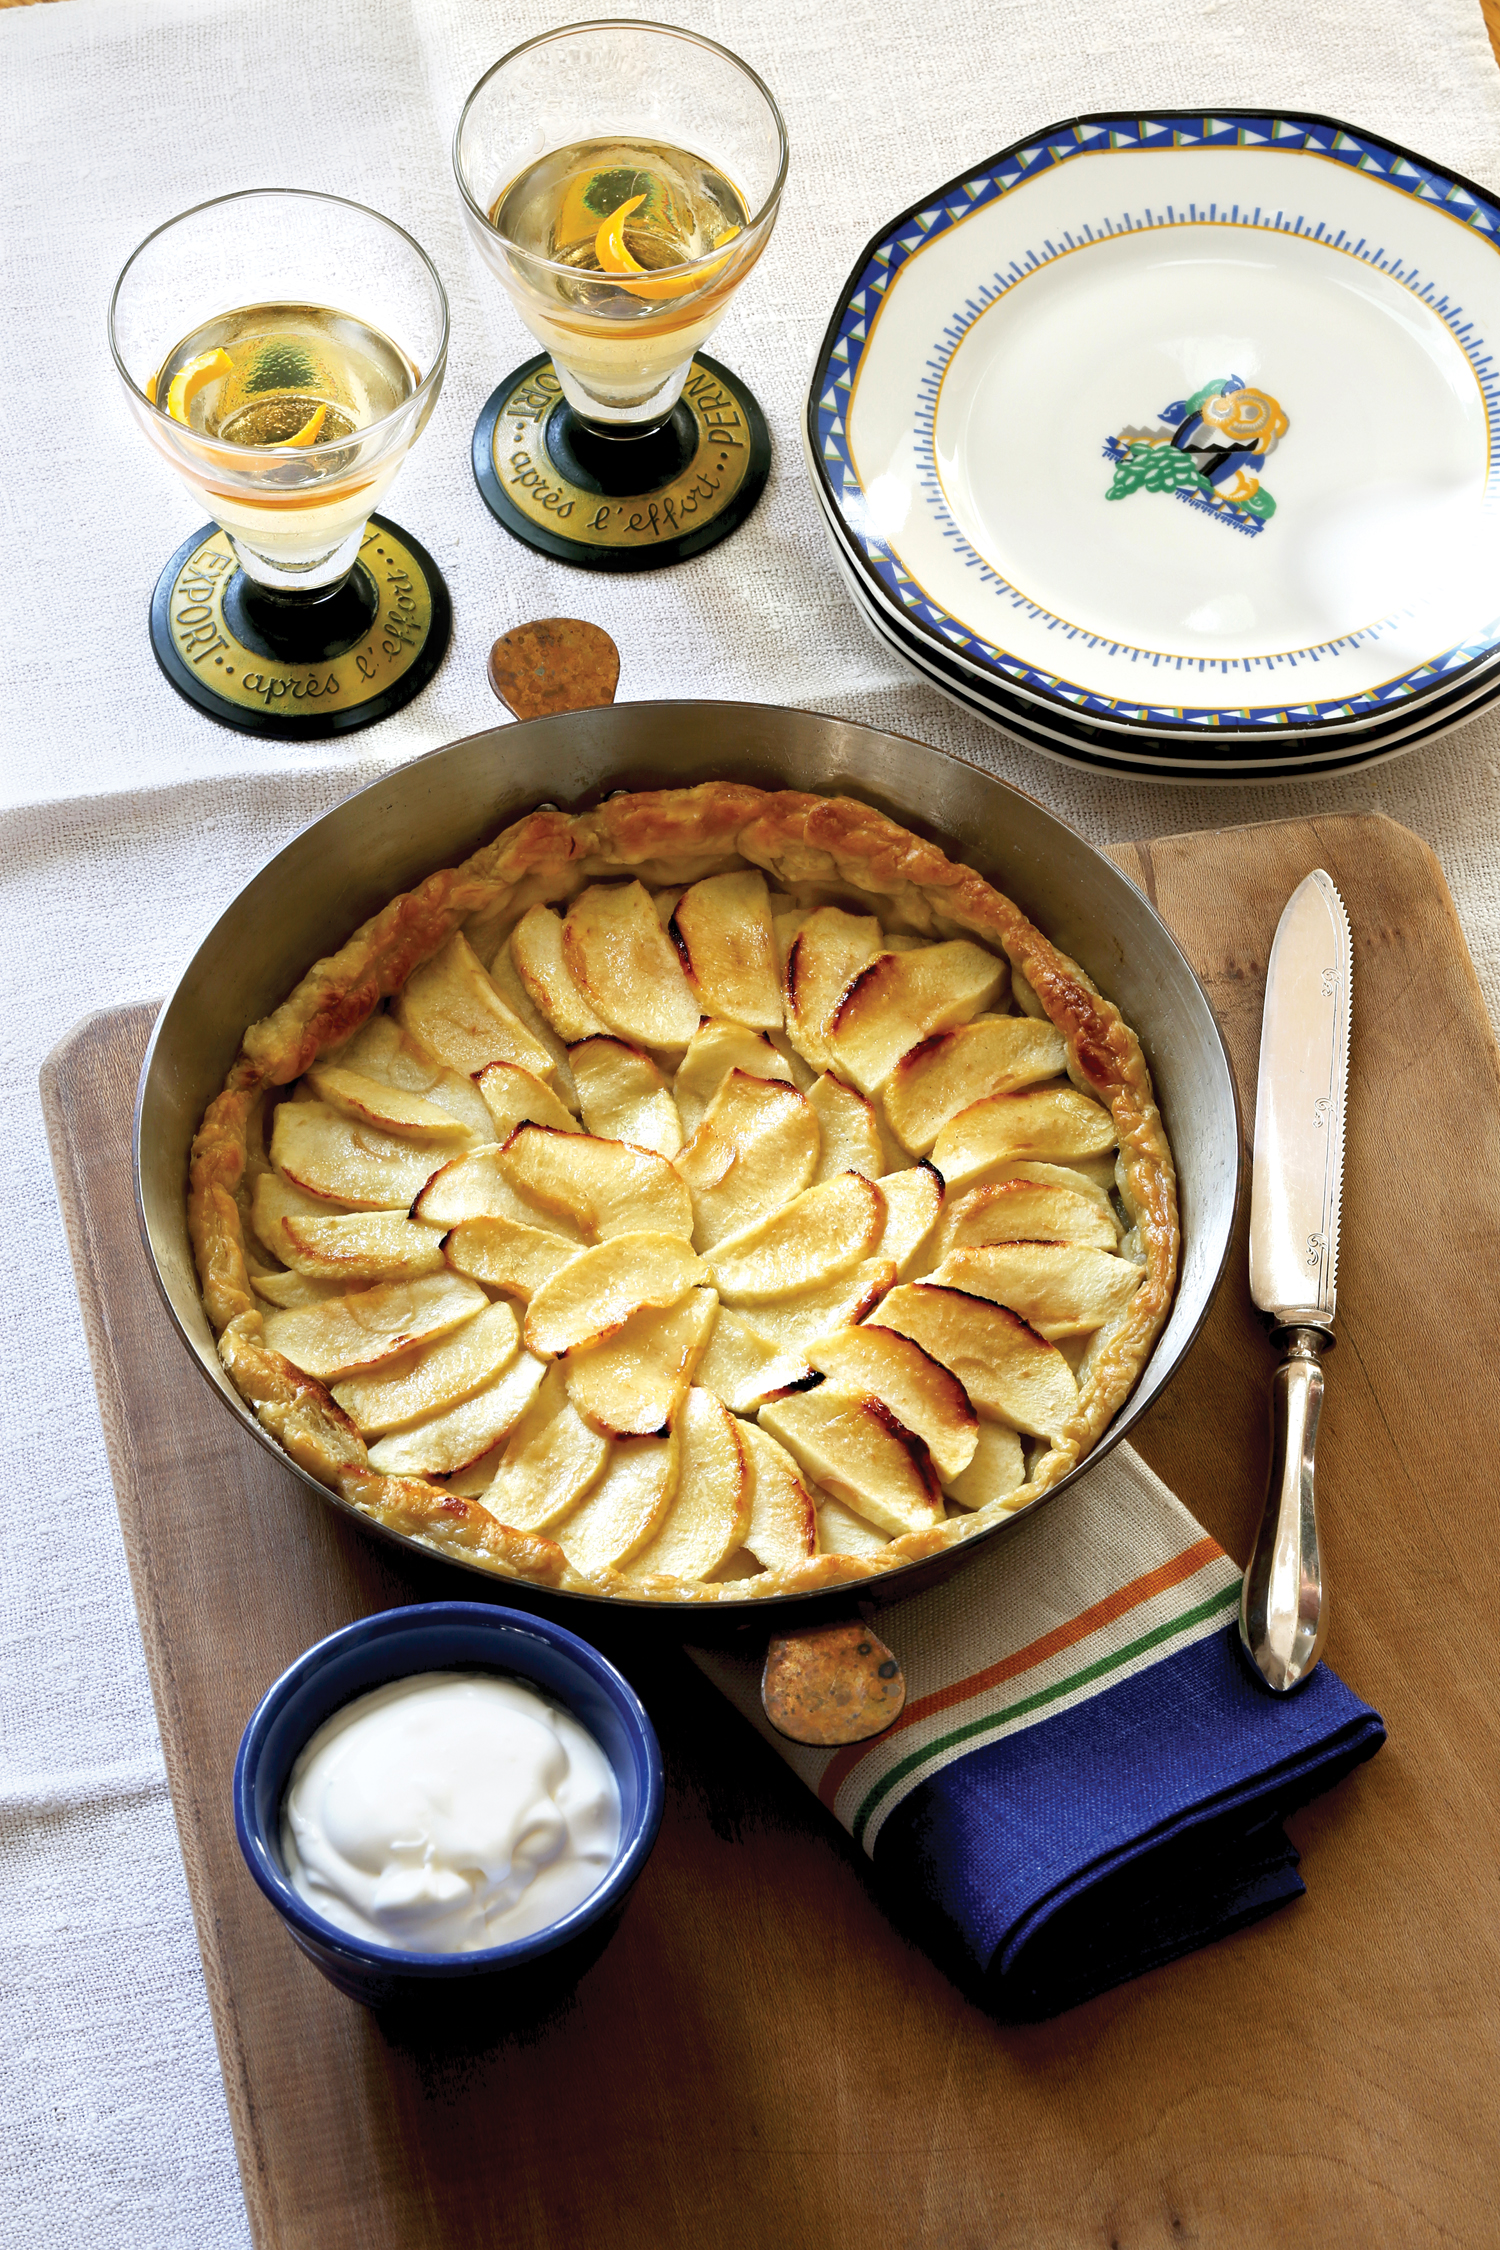 Normandy French Apple Tart from Monet's Palate Cookbook